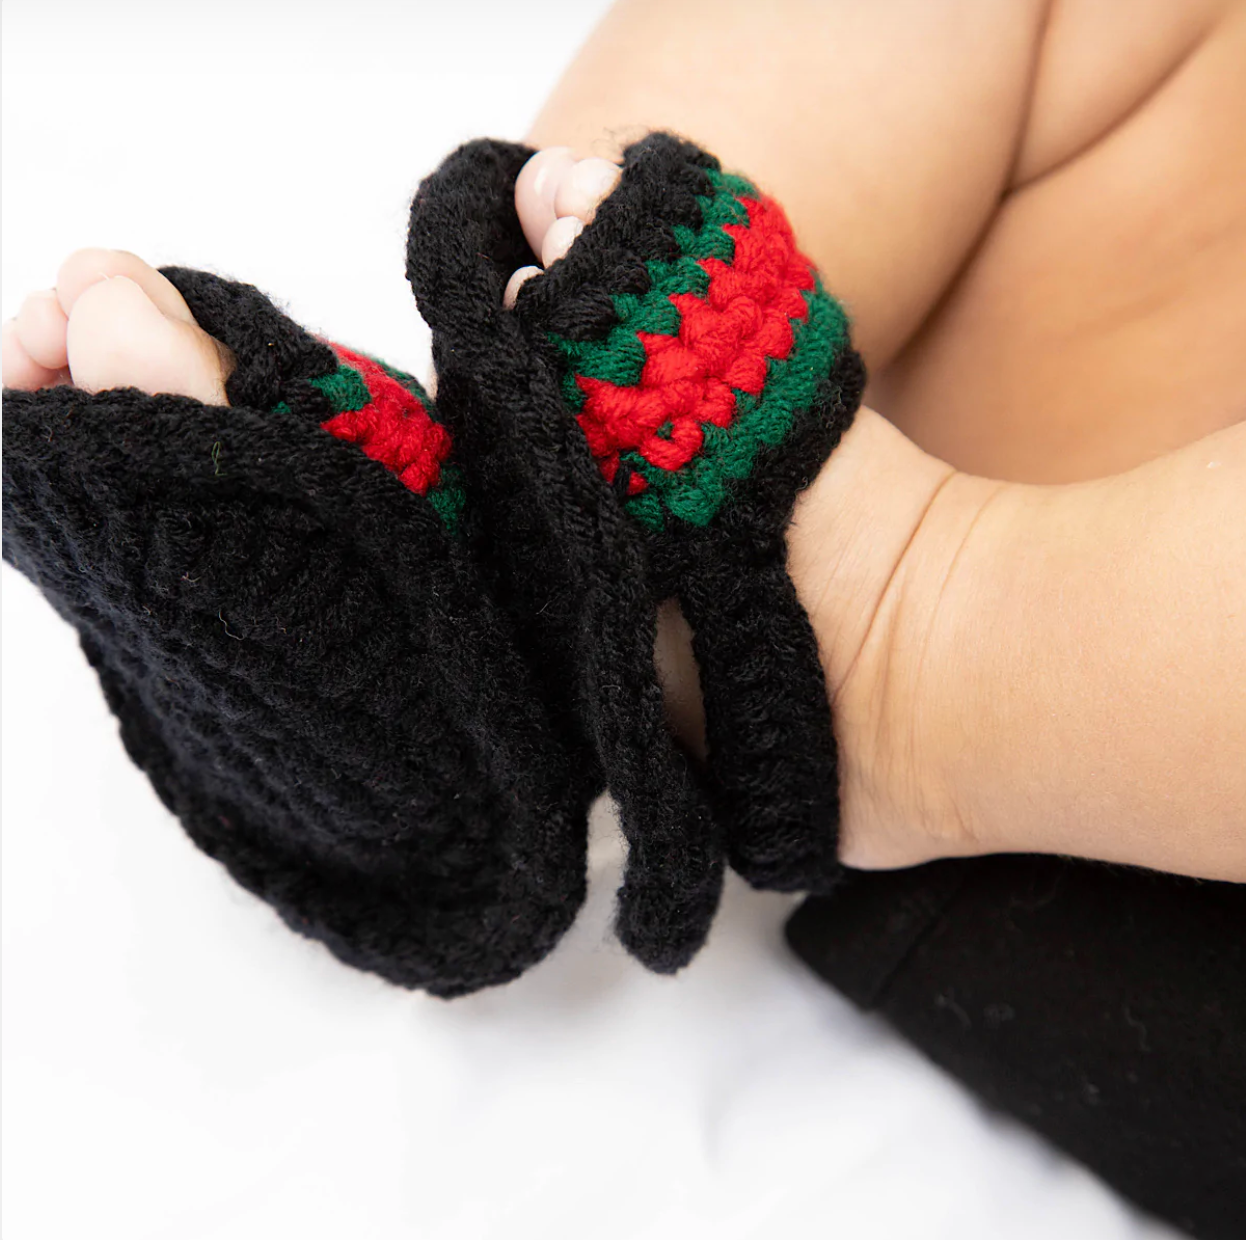 Baby Crochet Sneakers - Gucci Slides - Baby Sneakers Shop - unisex baby crochet shoes